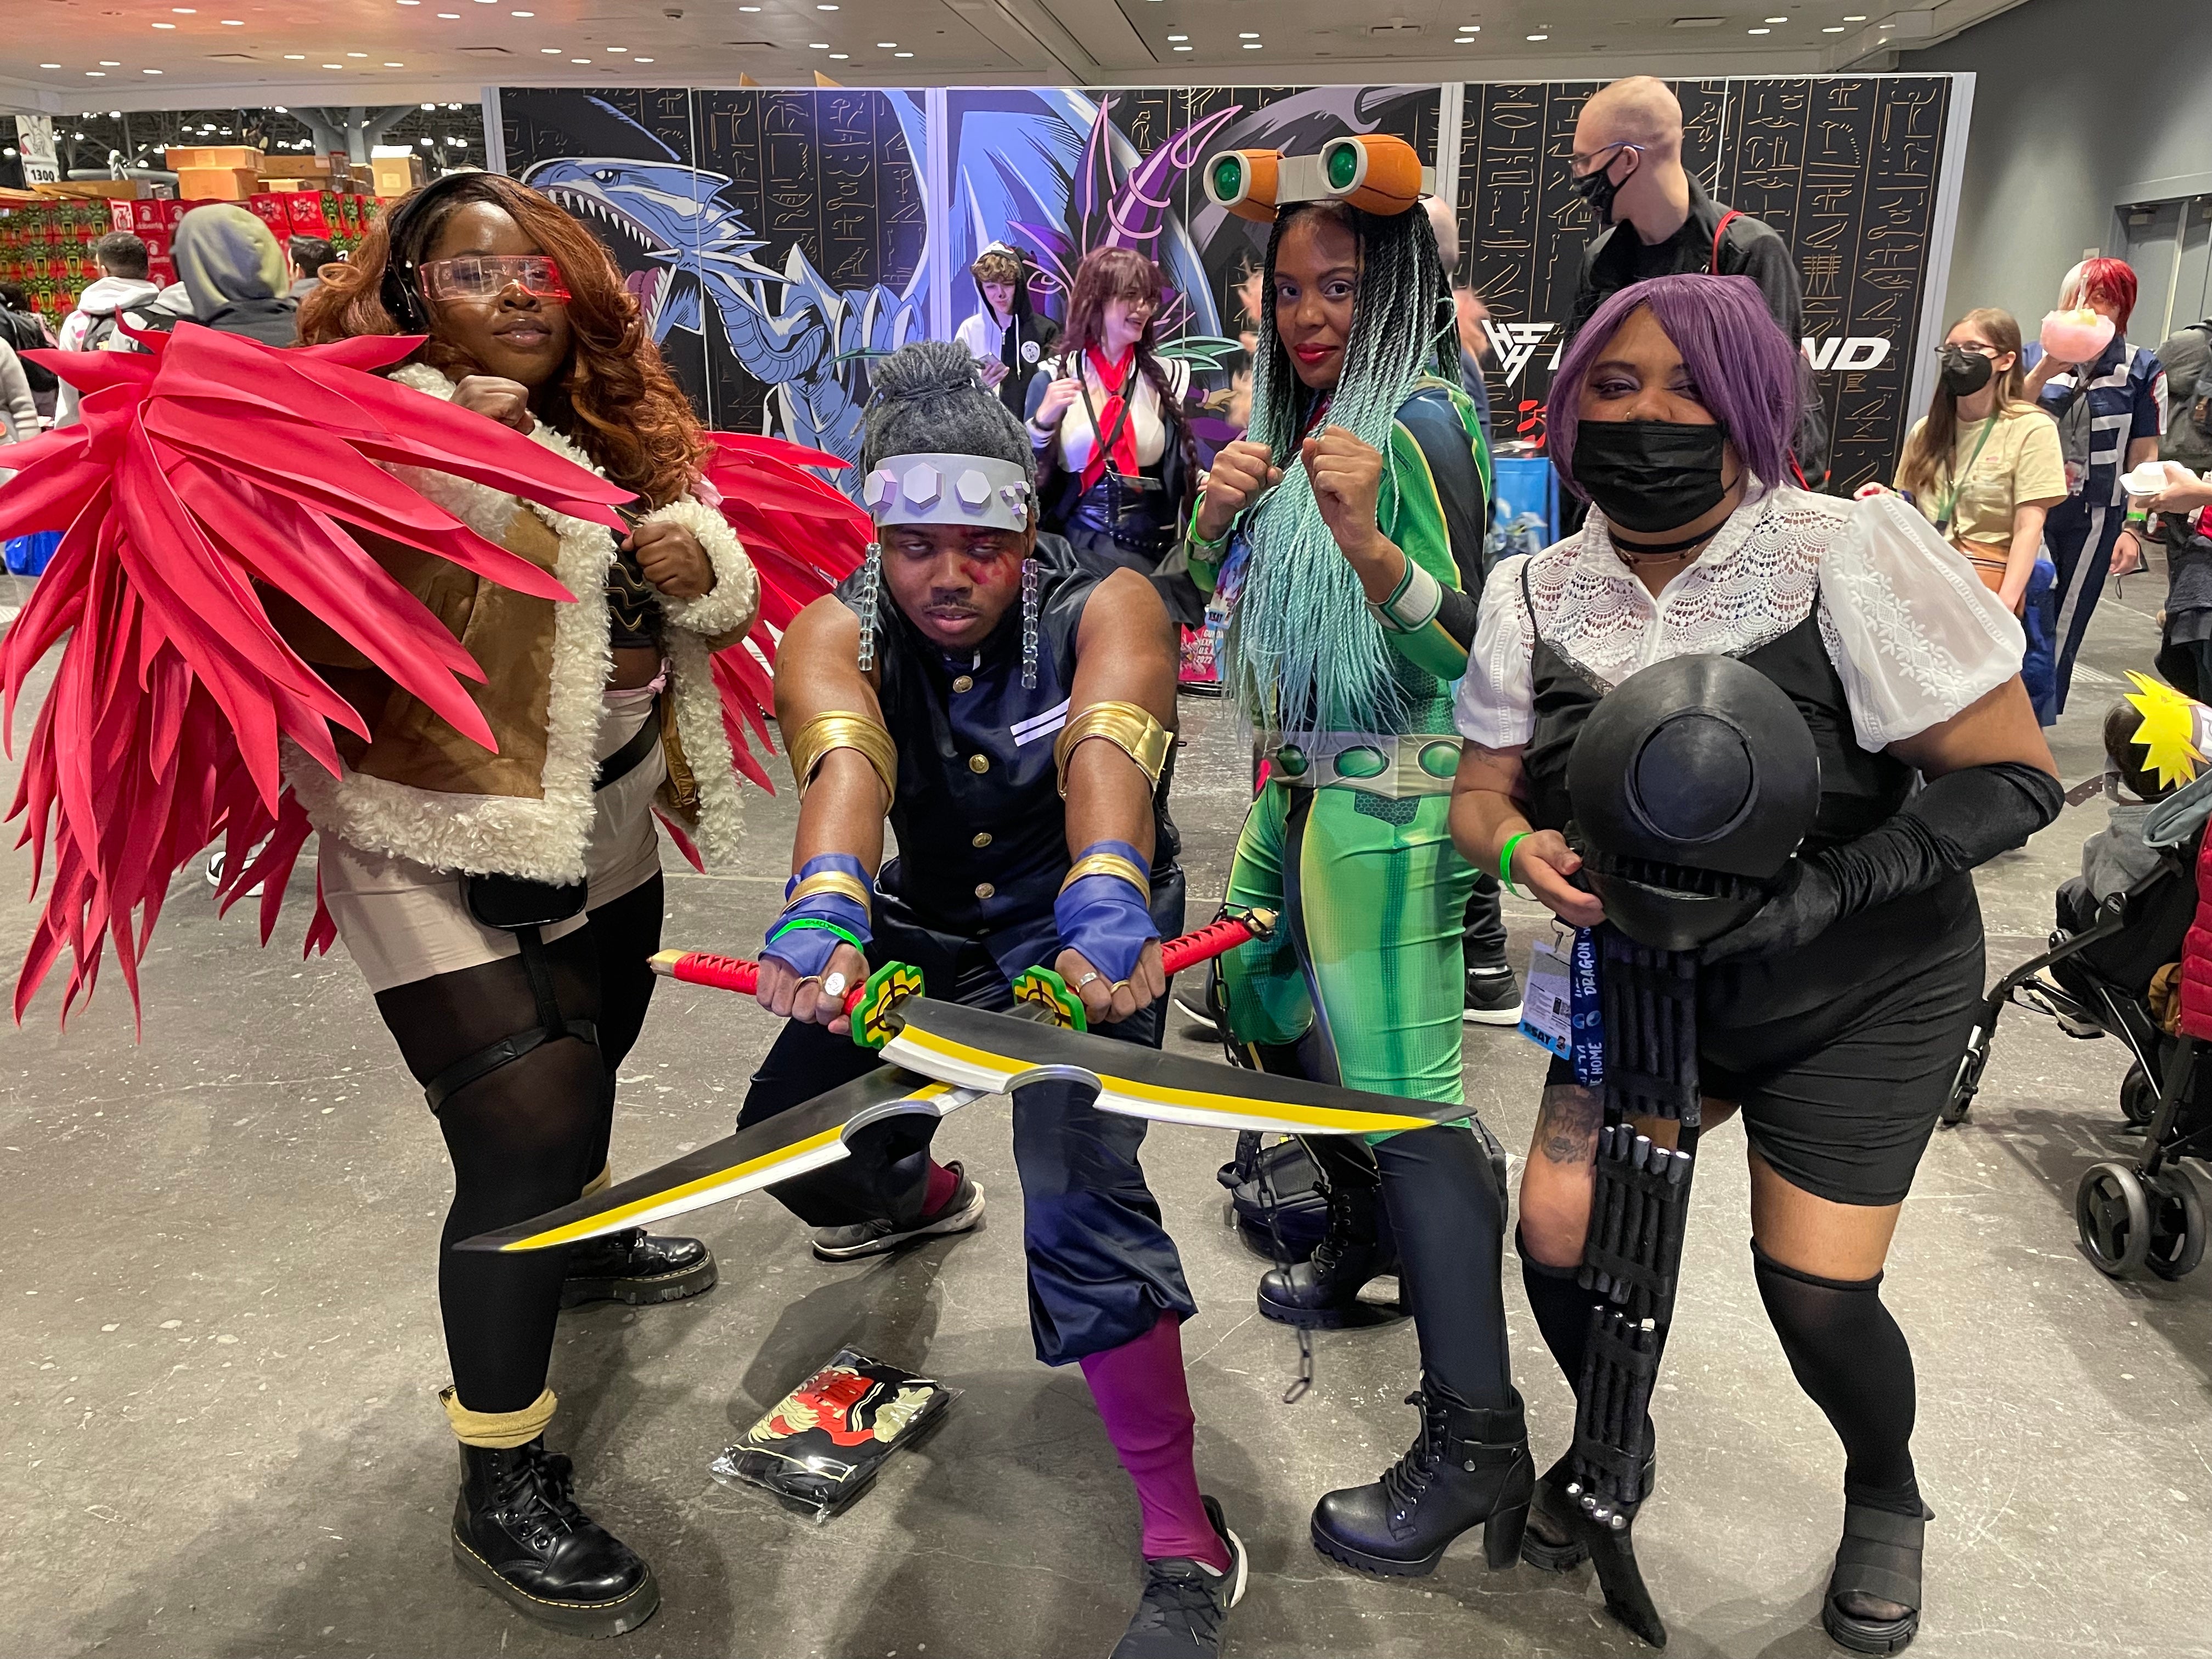 Our Favorite Anime Expo 2022 Cosplay  Beneath the Tangles